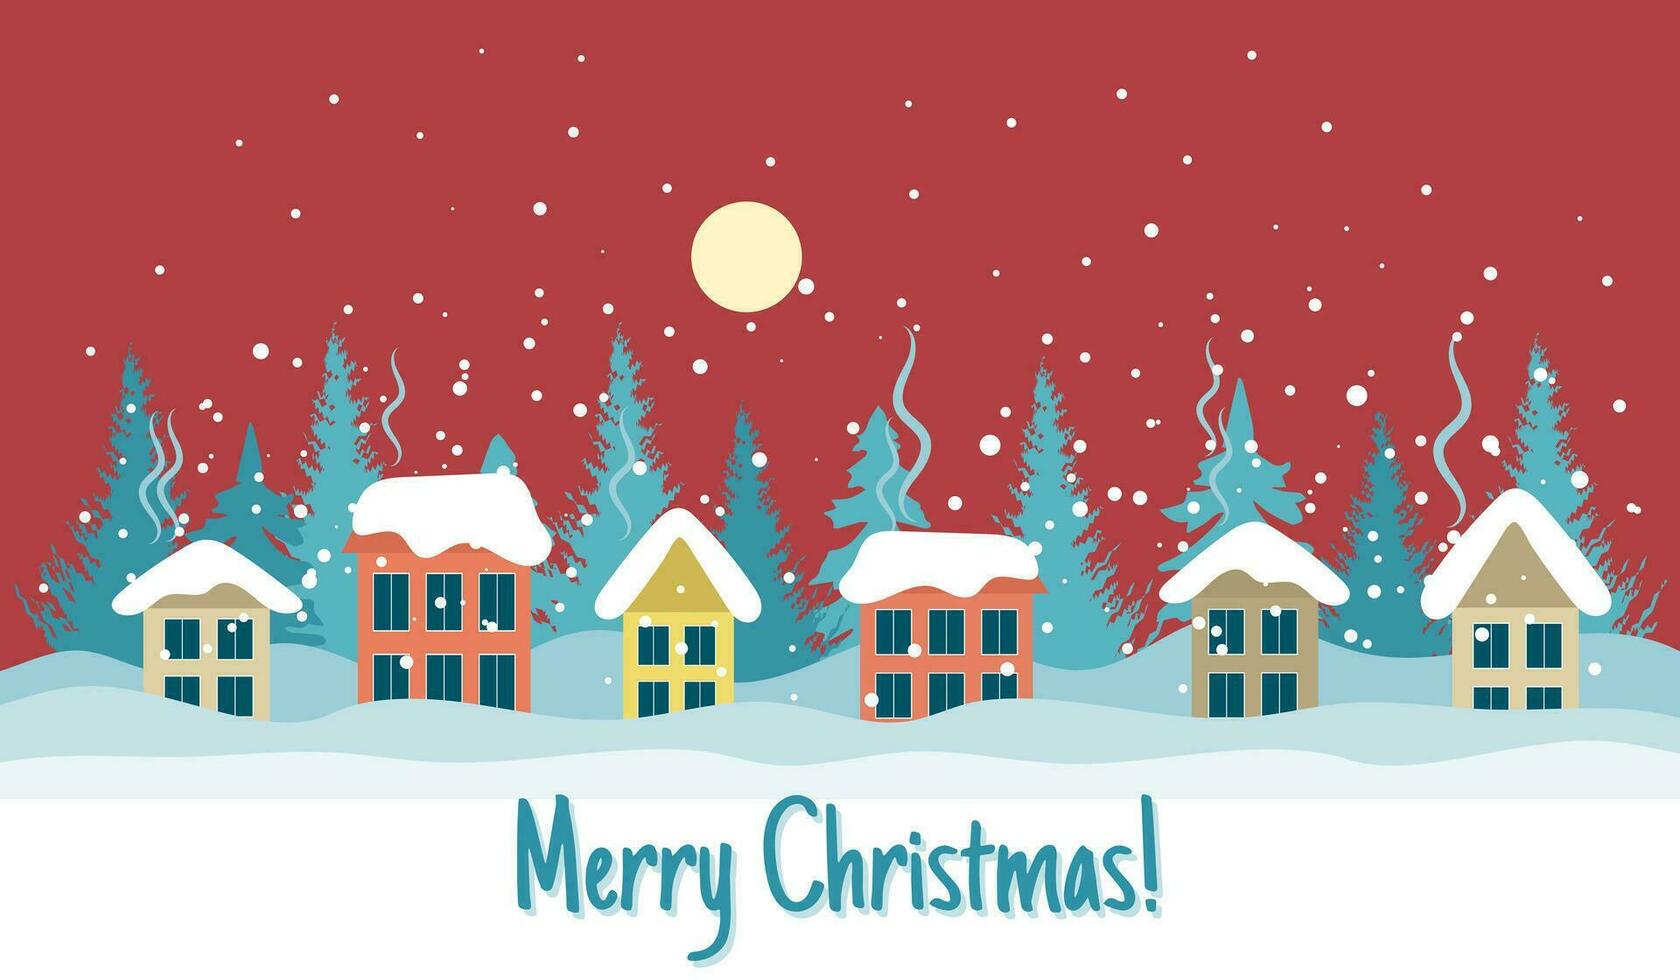 Winter landscape with cute houses, trees and night sky with moon, Merry Christmas greeting card template. Illustration in flat style. Vector